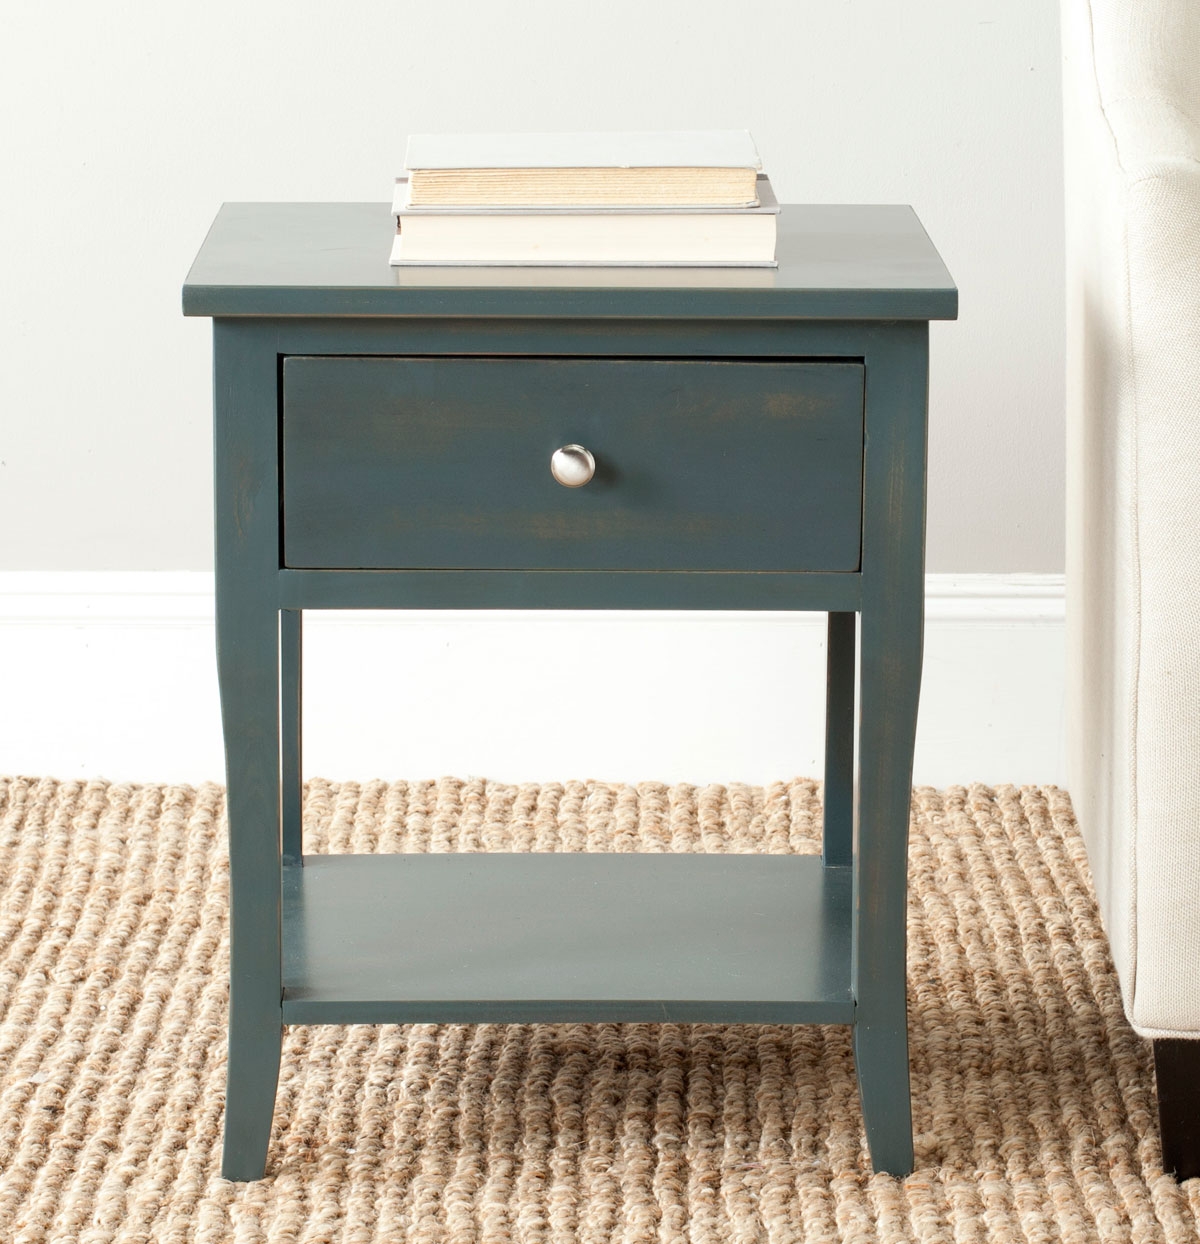 Coby Nightstand With Storage Drawer - Steel Teal - Arlo Home - Image 1